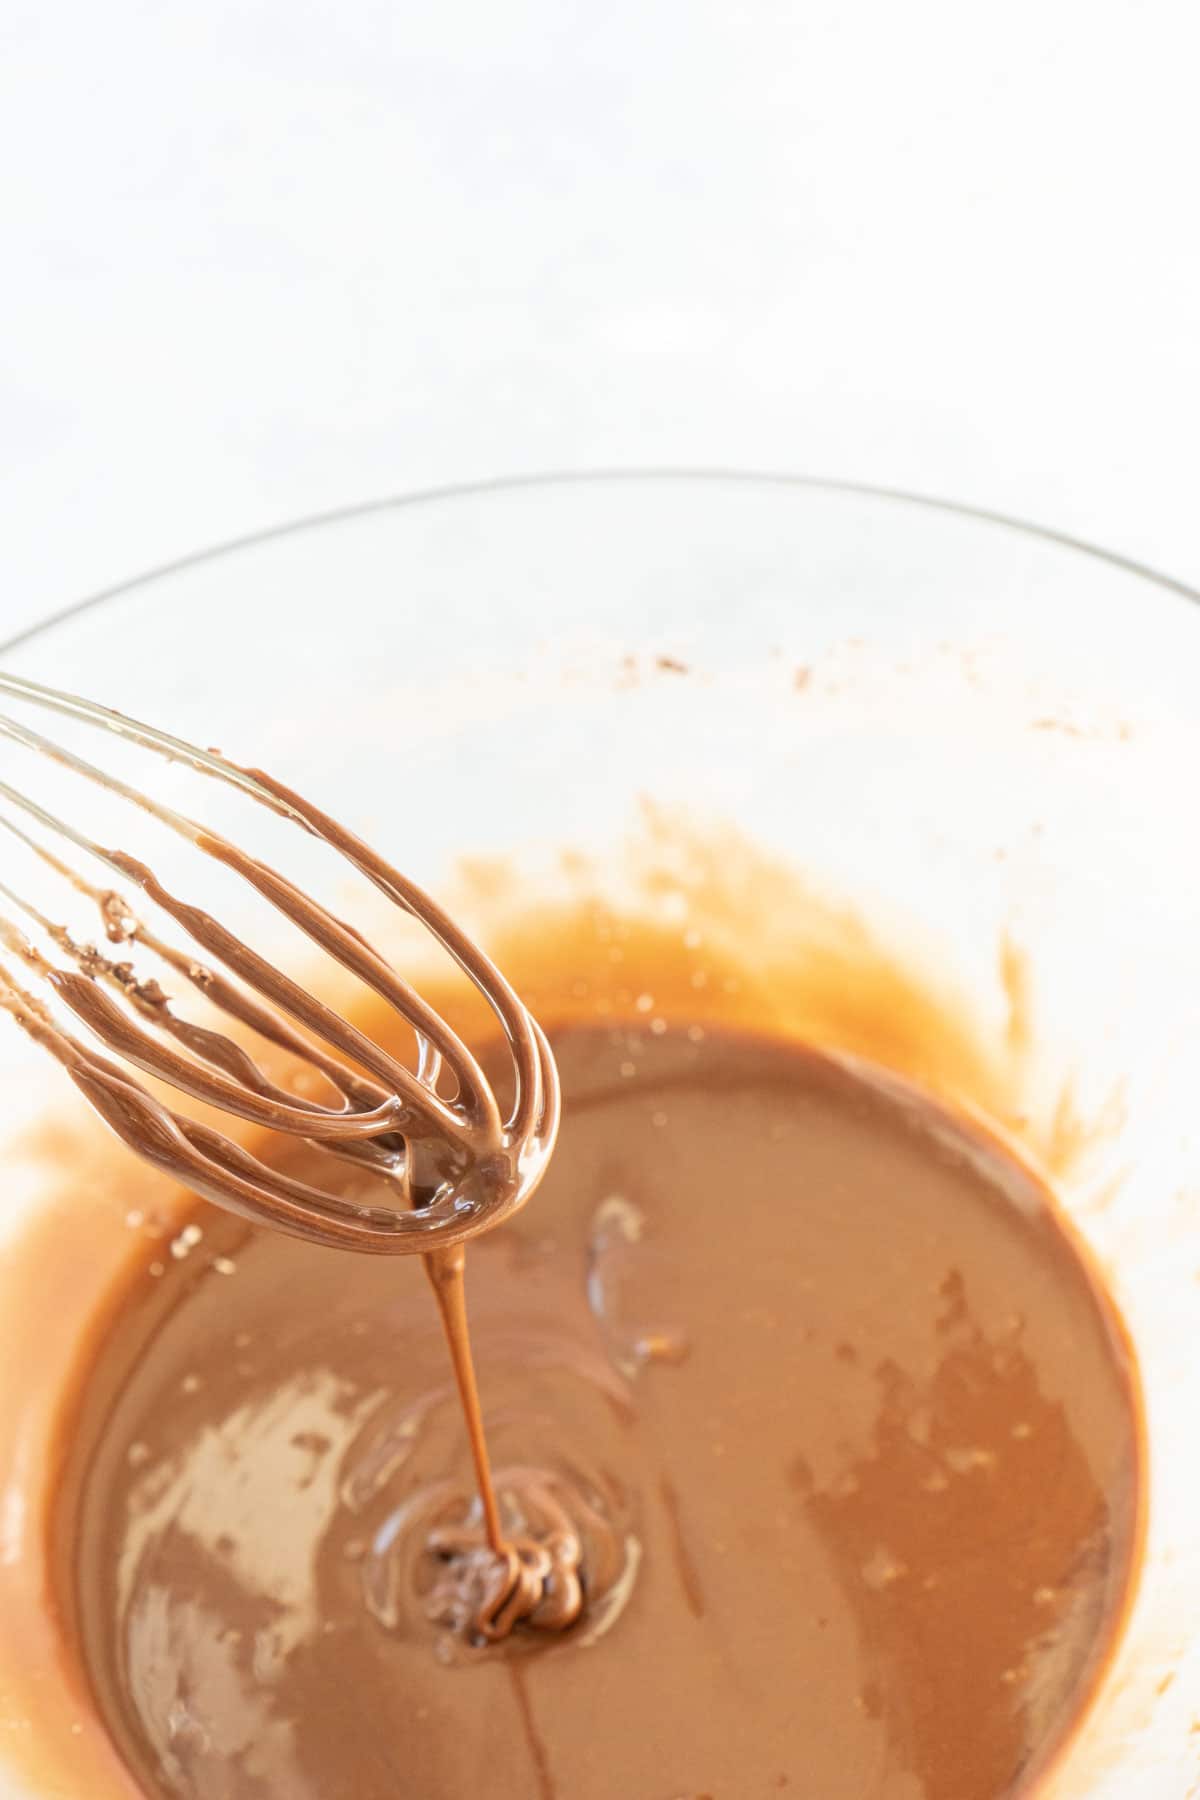 Whisk in a bowl with chocolate glaze